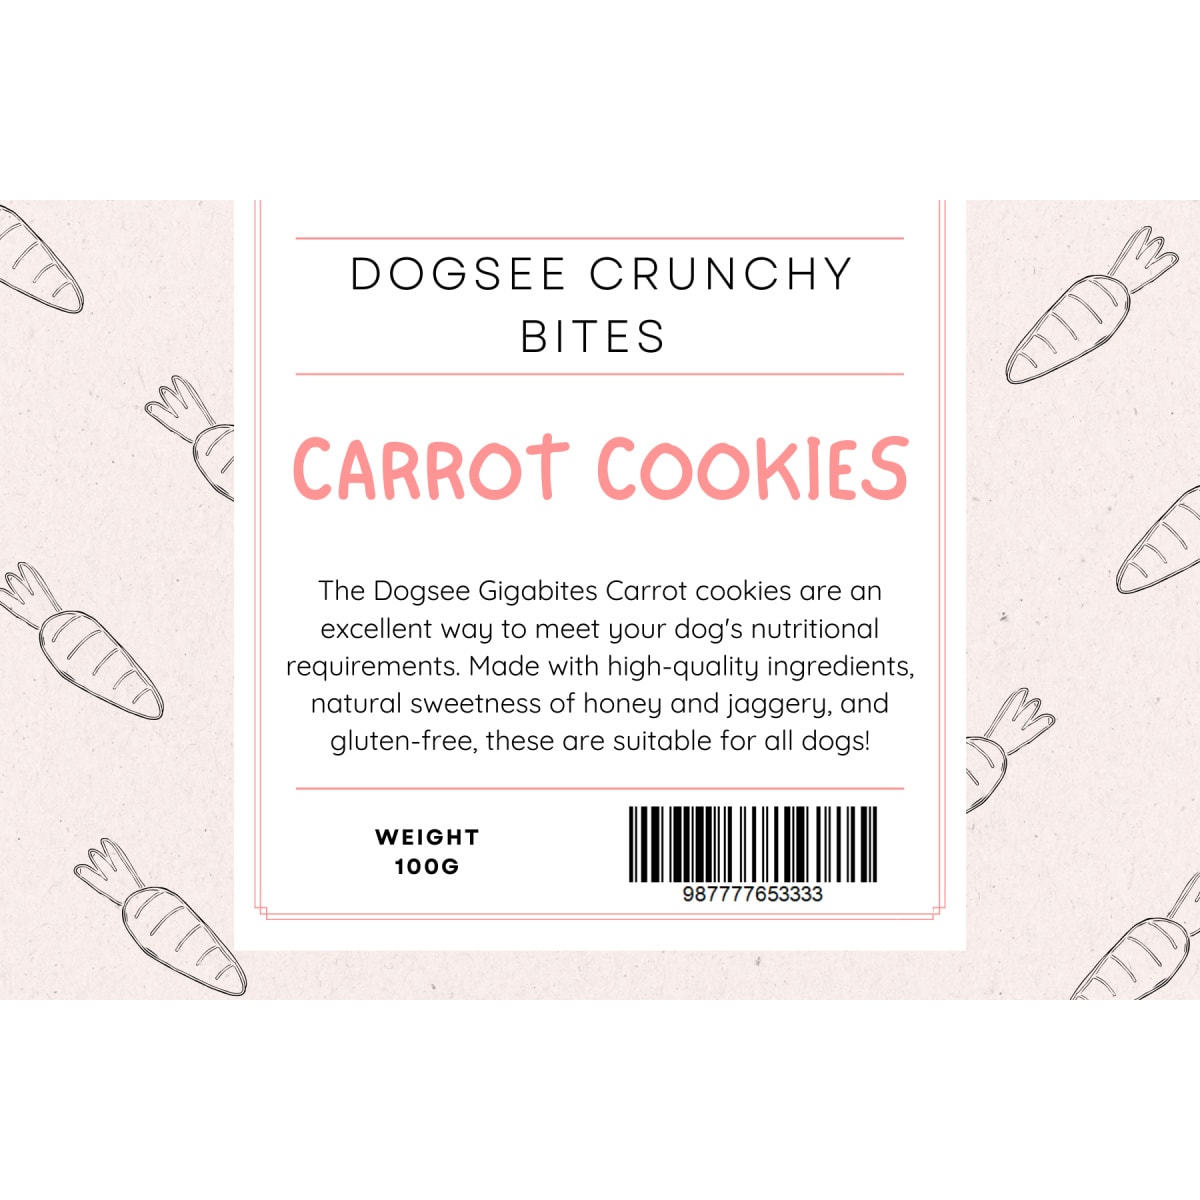 Dogsee Carrot Cookies 100g Main Image